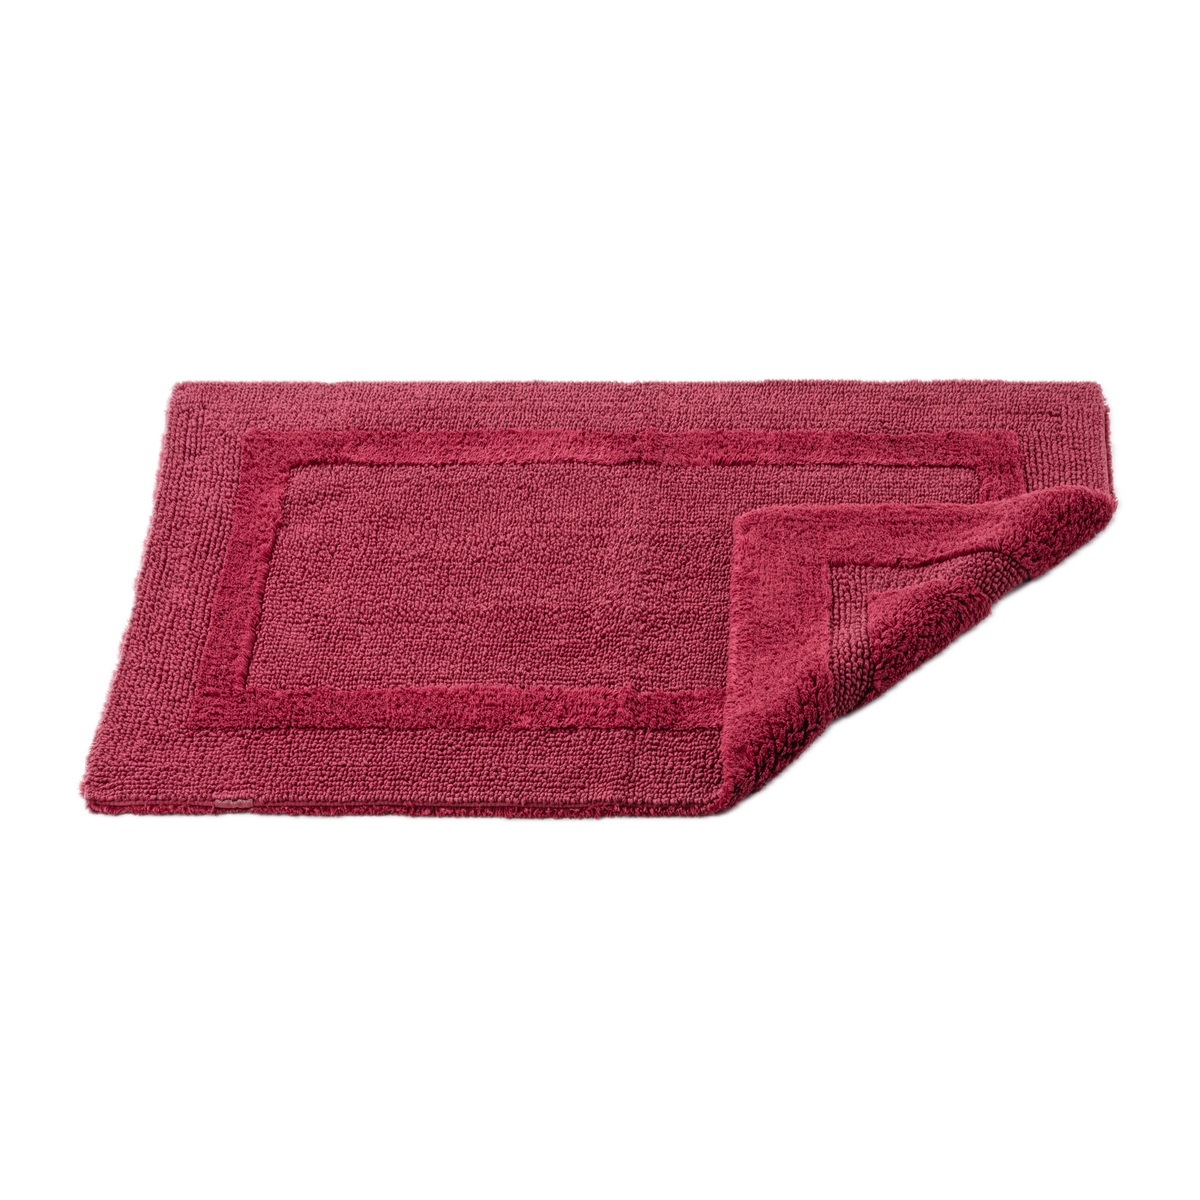 Abyss Habidecor Reversible Bath Rug in Canyon Color with Corner Fold